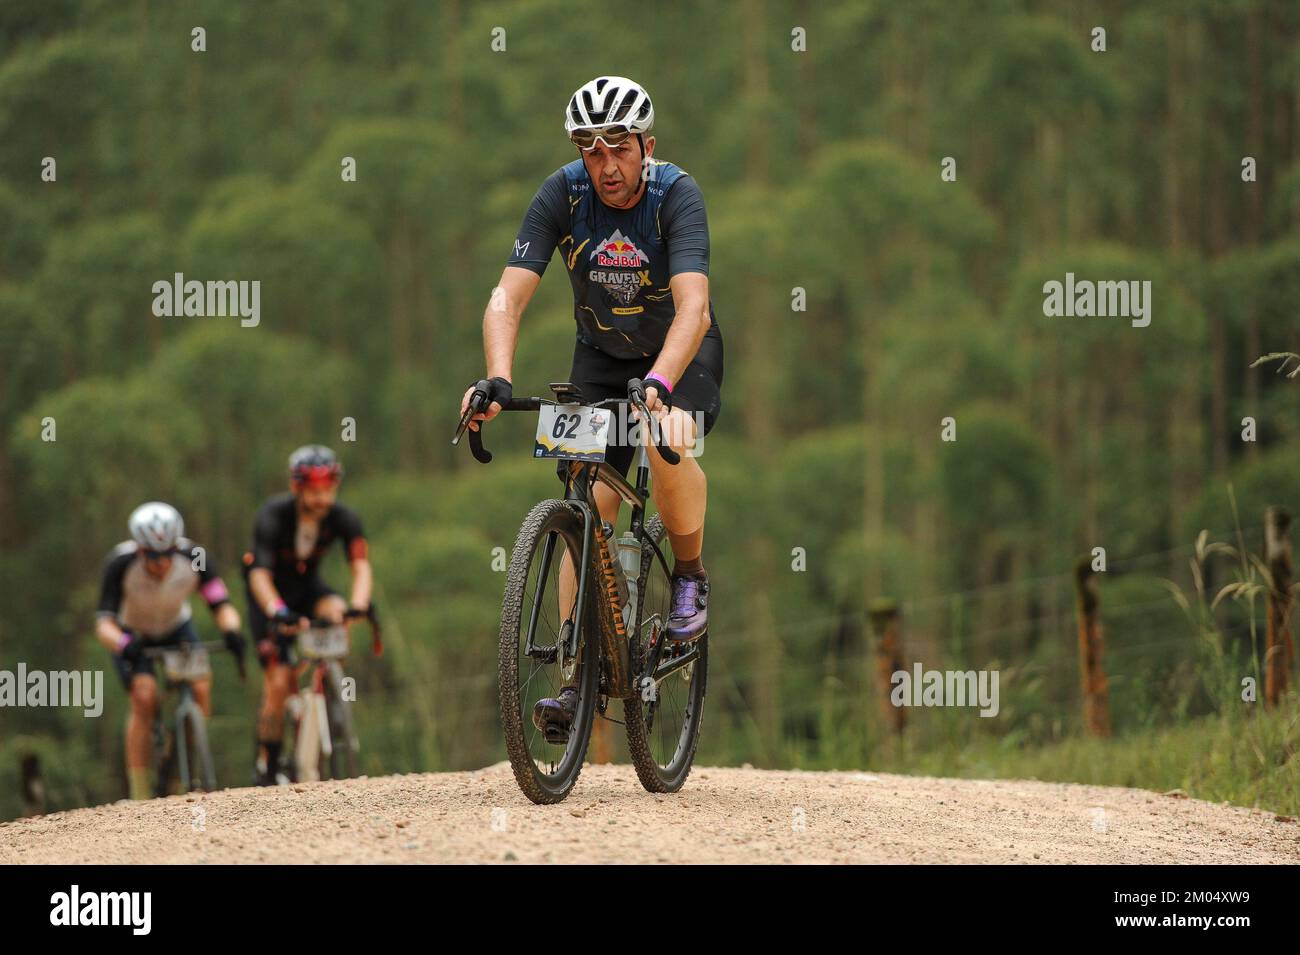 TIMB', SC - 03.12.2022: RED BULL GRAVEL X VALE EUROPEU - Between the 2nd and 4th of December, the European Valley of Santa Catarina will host the first gravel crossing event in Brazil, the Red Bull Gravel X. Athletes from some countries around the world will challenge each other along the 300 km of the route. Champions like Tiago Ferreira, Portugal, are confirmed at the event. (Photo: Fábio Monteiro/Fotoarena) Stock Photo